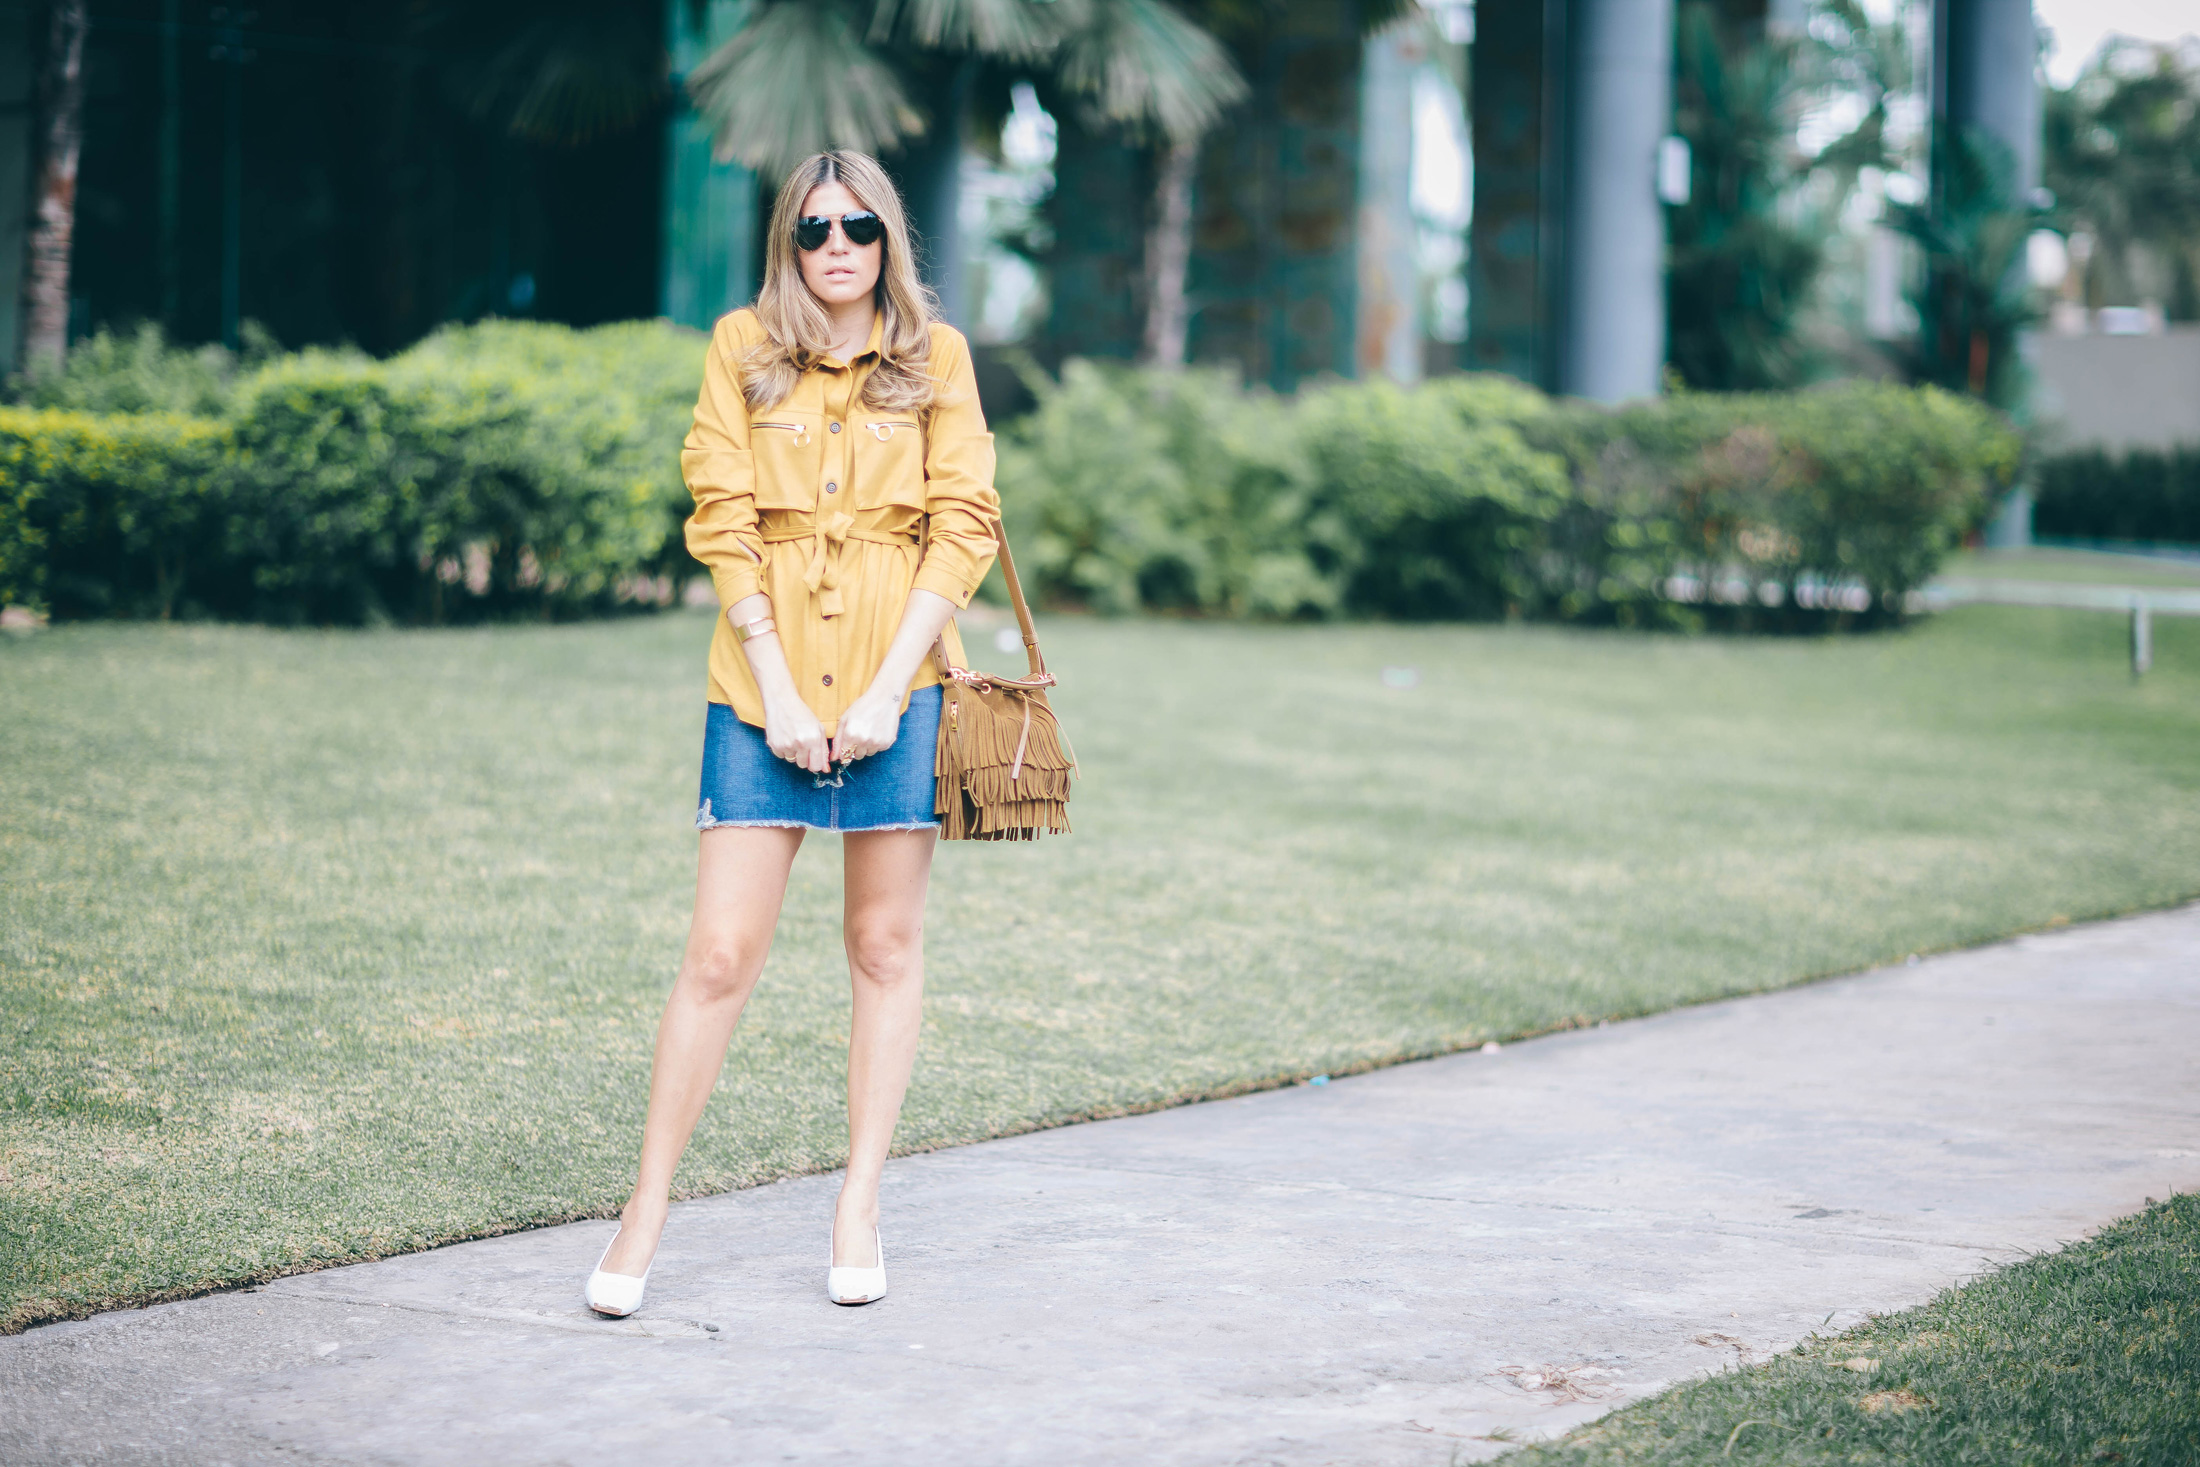 A Constellation blogger wears a suede belted jacket, denim skirt, slingback shoes and fringe bucket bag with aviator sunglasses